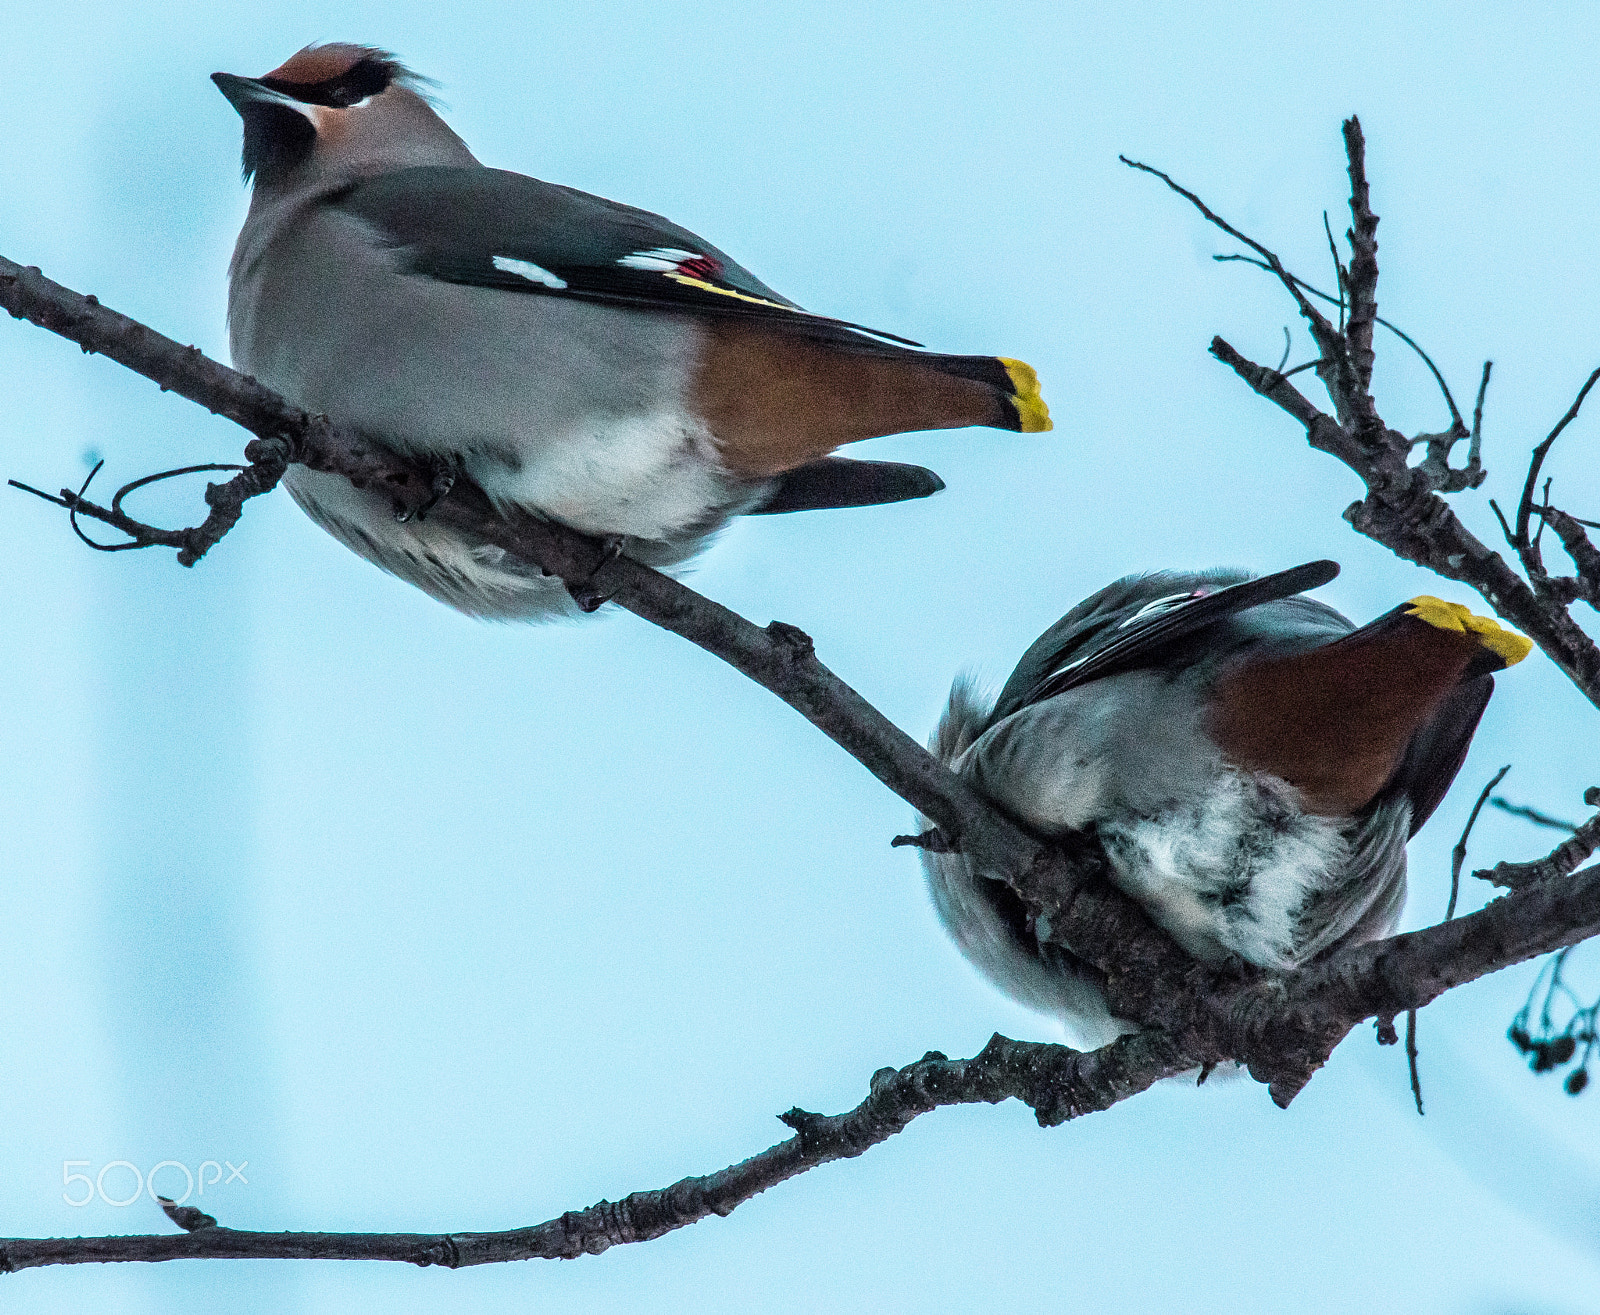 Sigma 150-500mm F5-6.3 DG OS HSM sample photo. Waxwinged duo photography